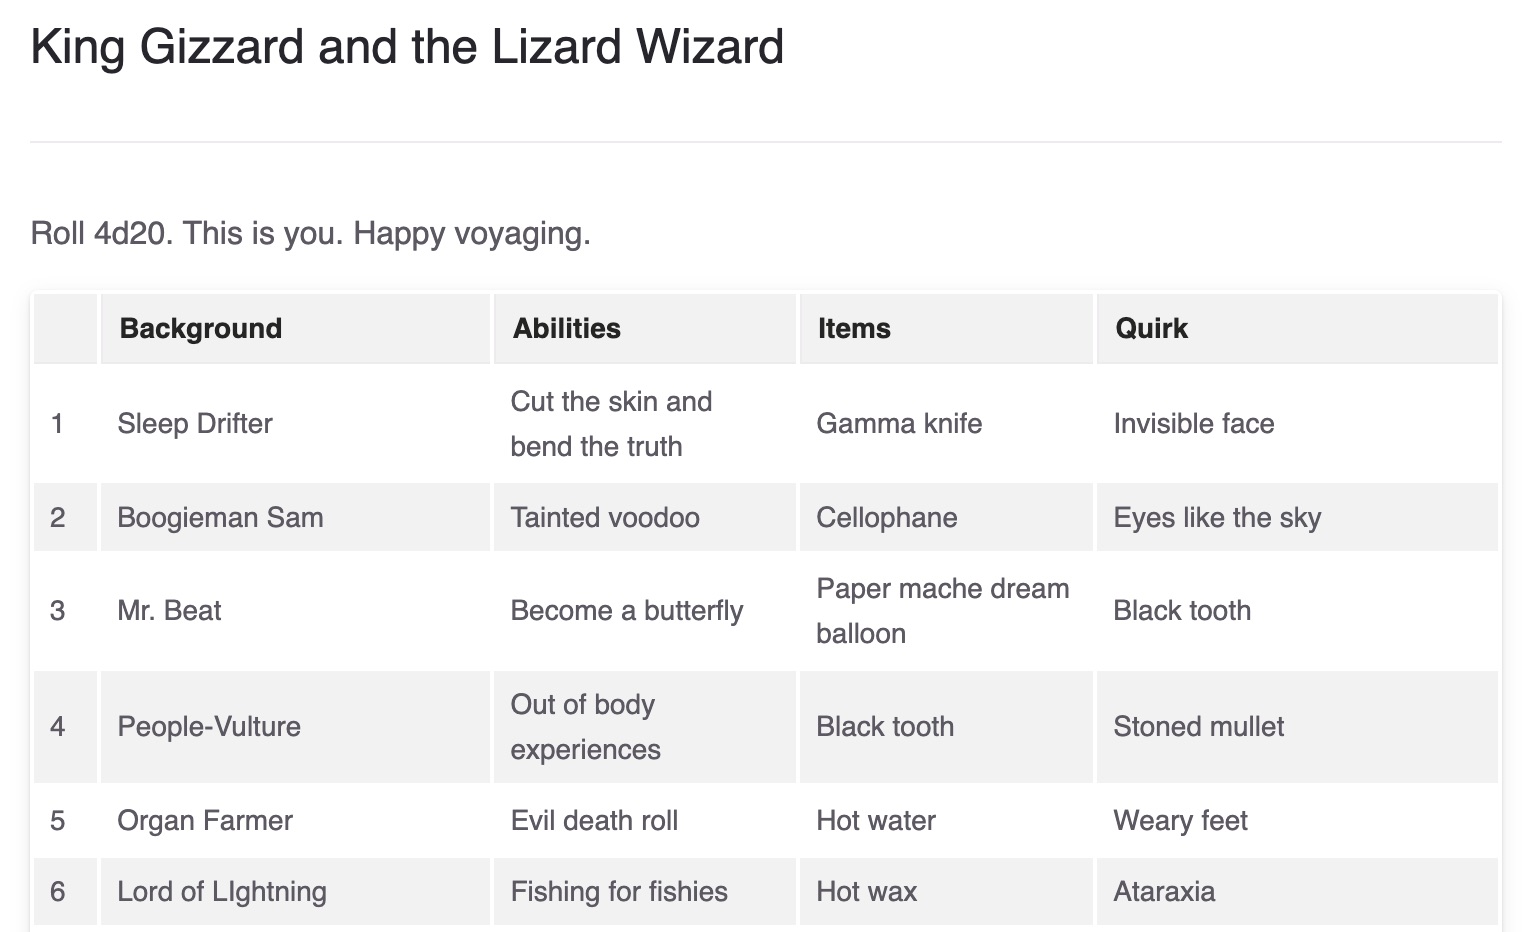 King Gizzard and the Lizard Wizard 4d20 Table